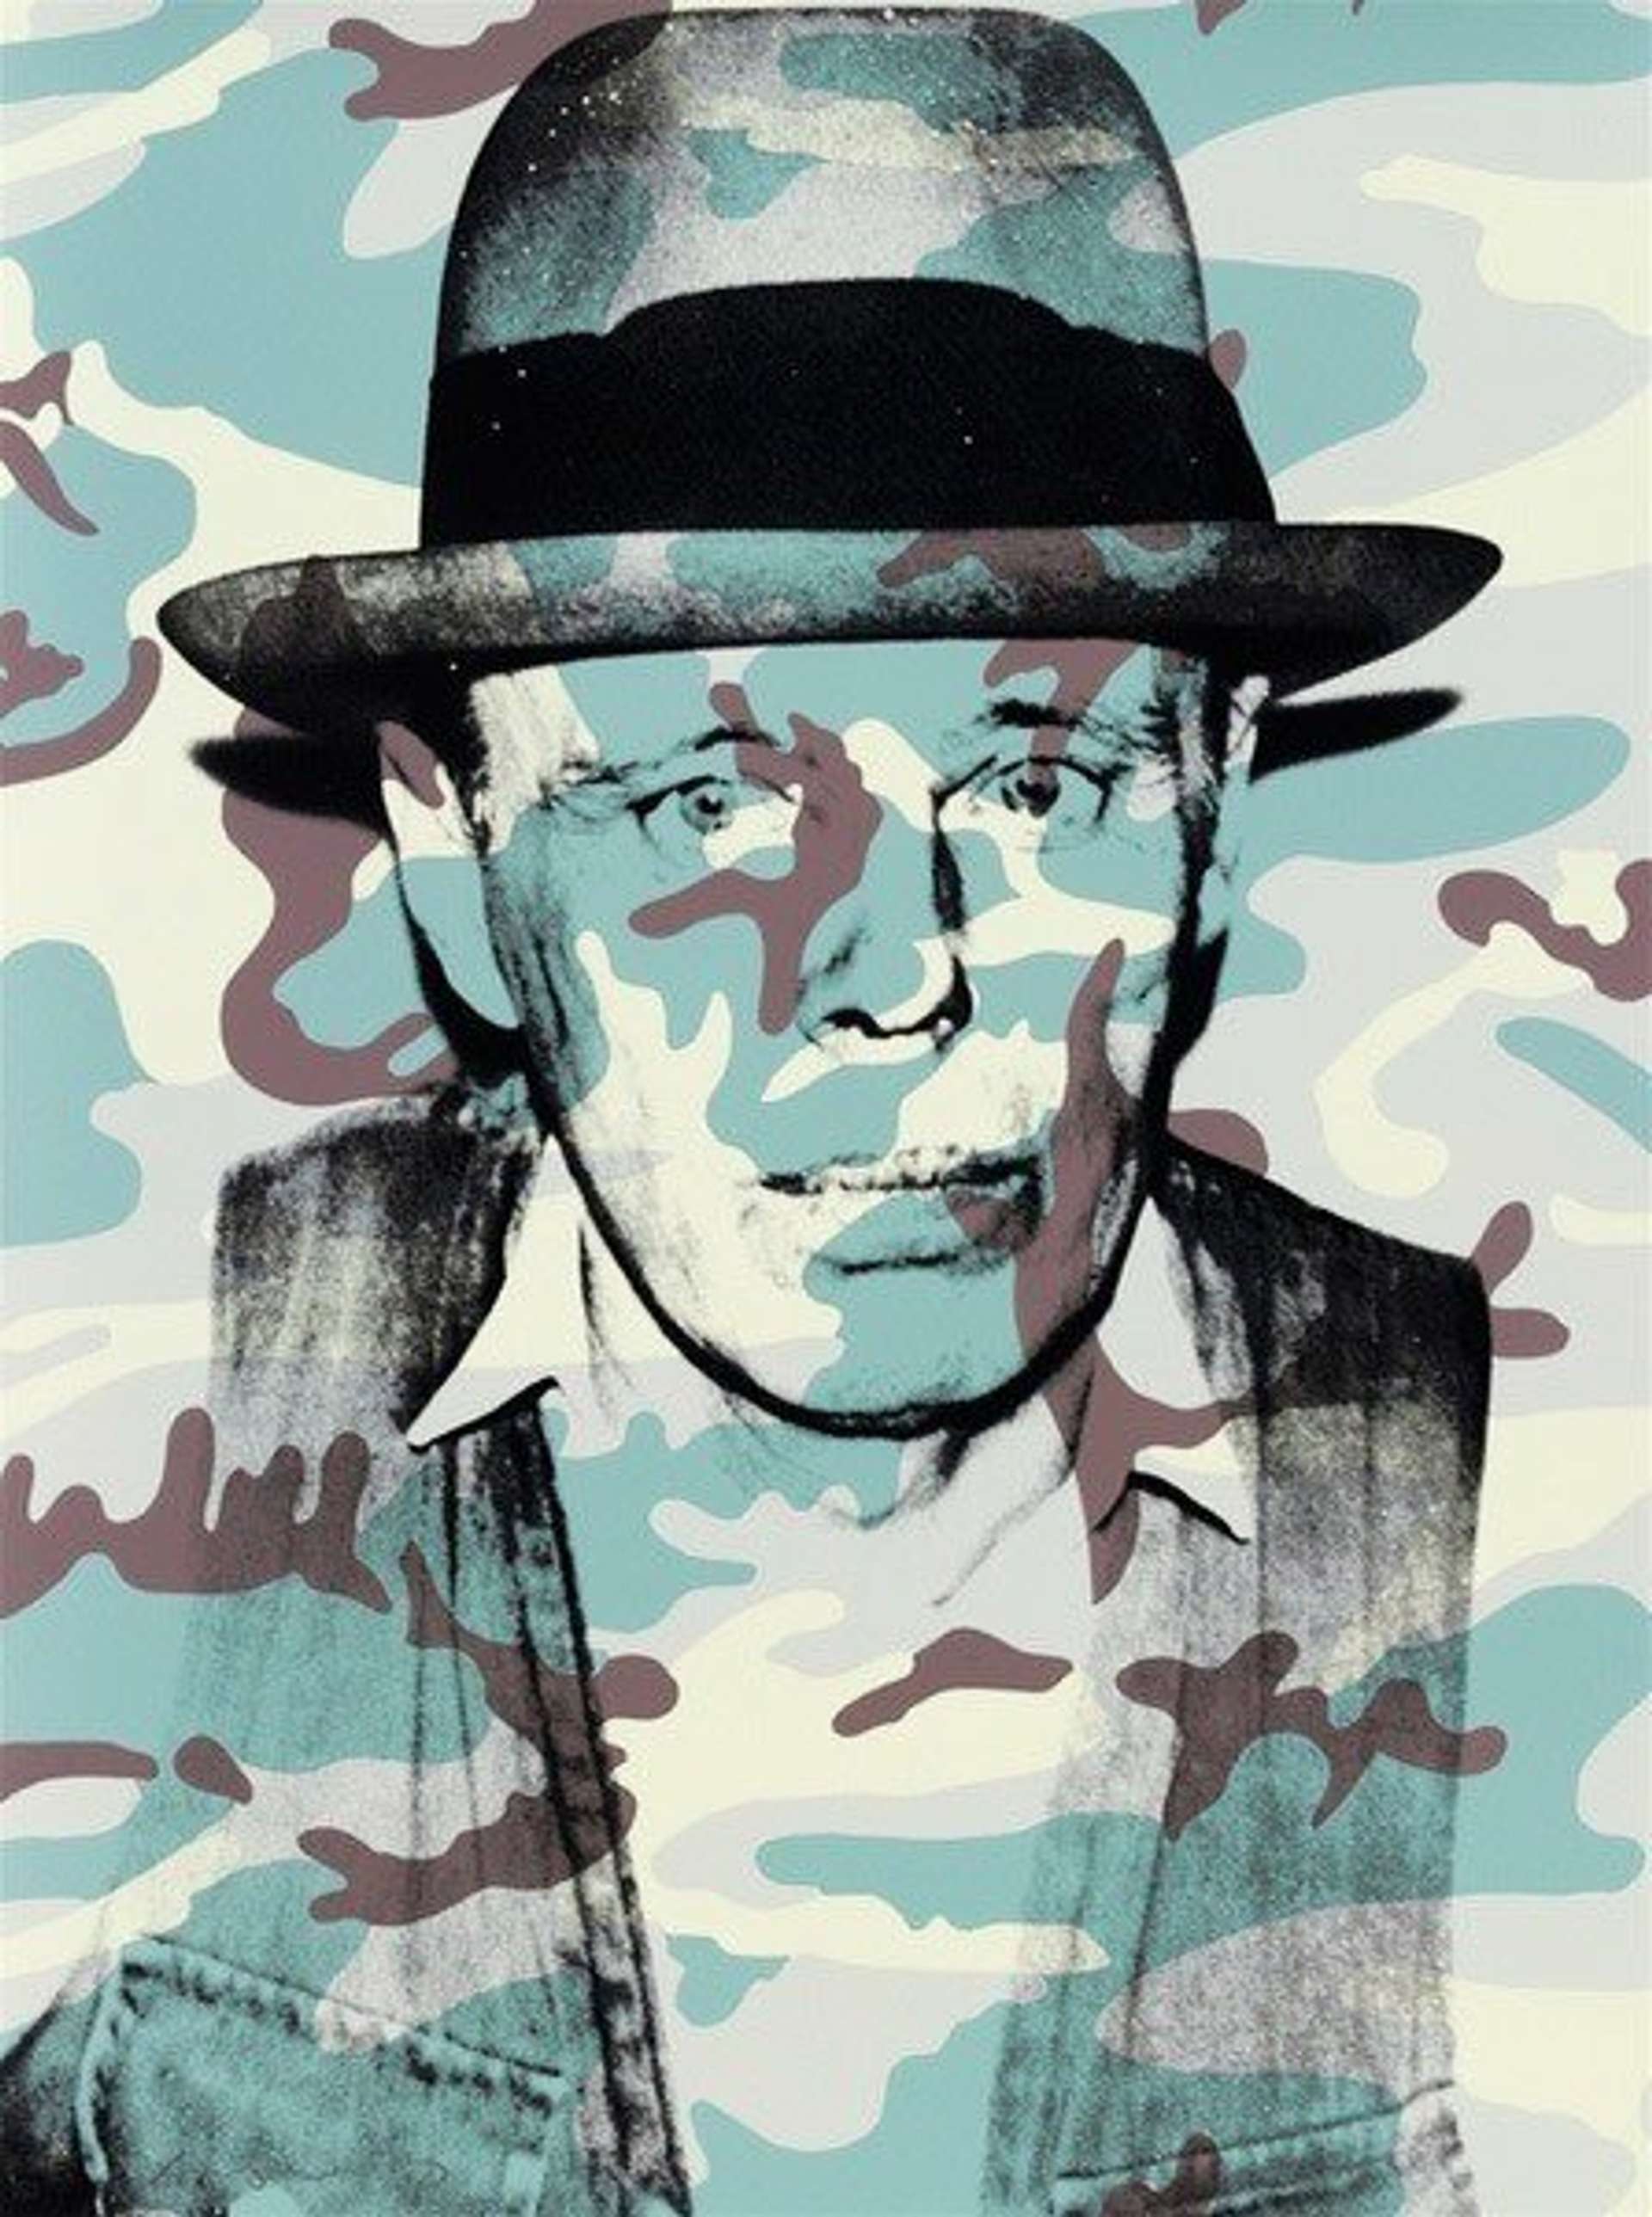 Joseph Beuys In Memoriam (F. & S. II.371) by Andy Warhol